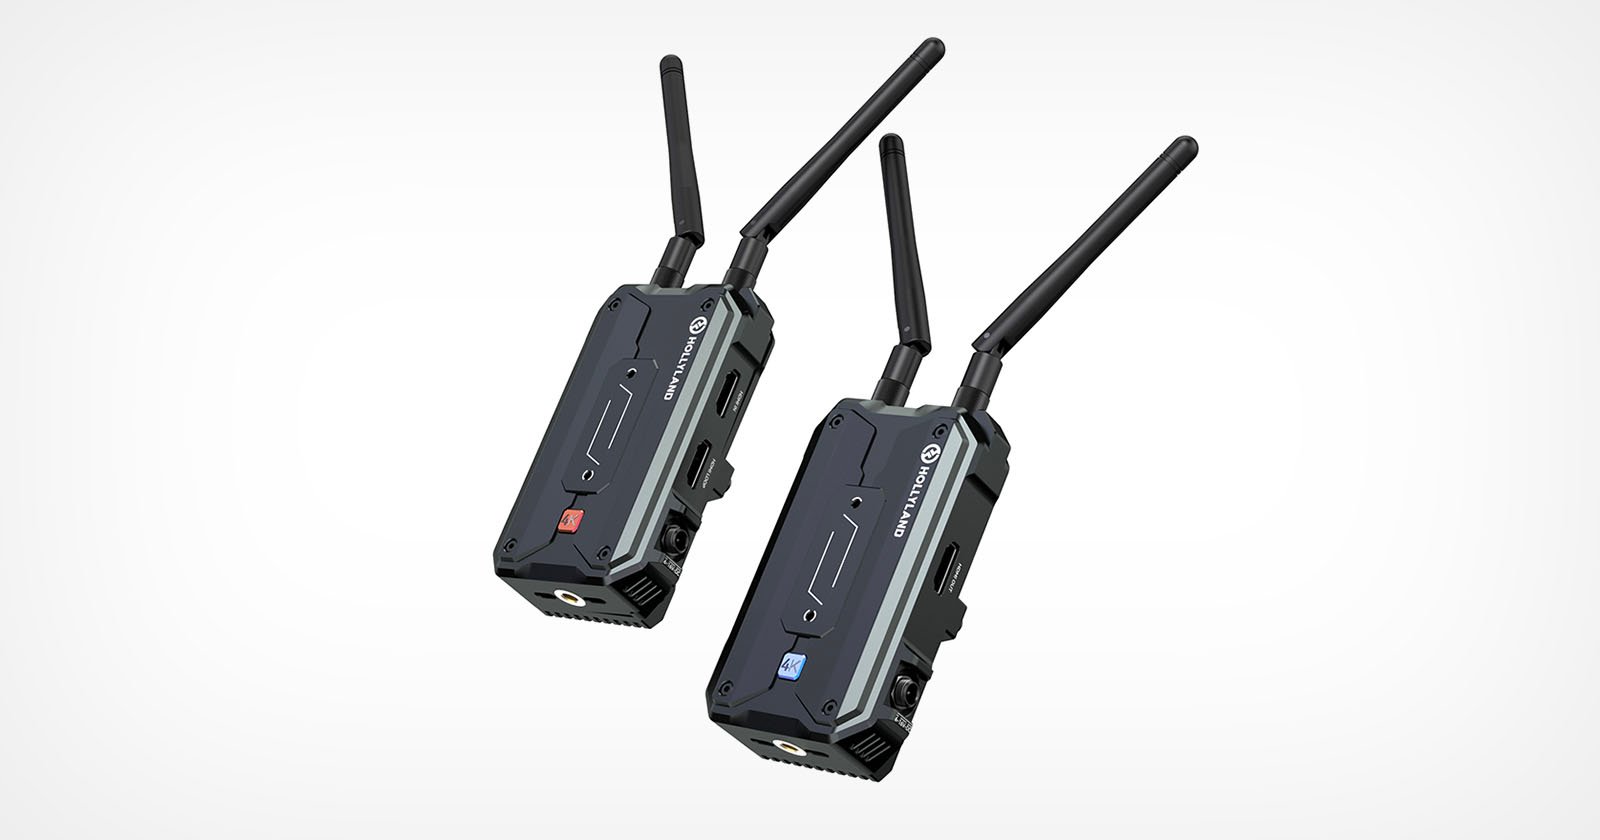 Hollyland’s New Pyro Series Wirelessly Transmits Video Up to 1,300 Feet